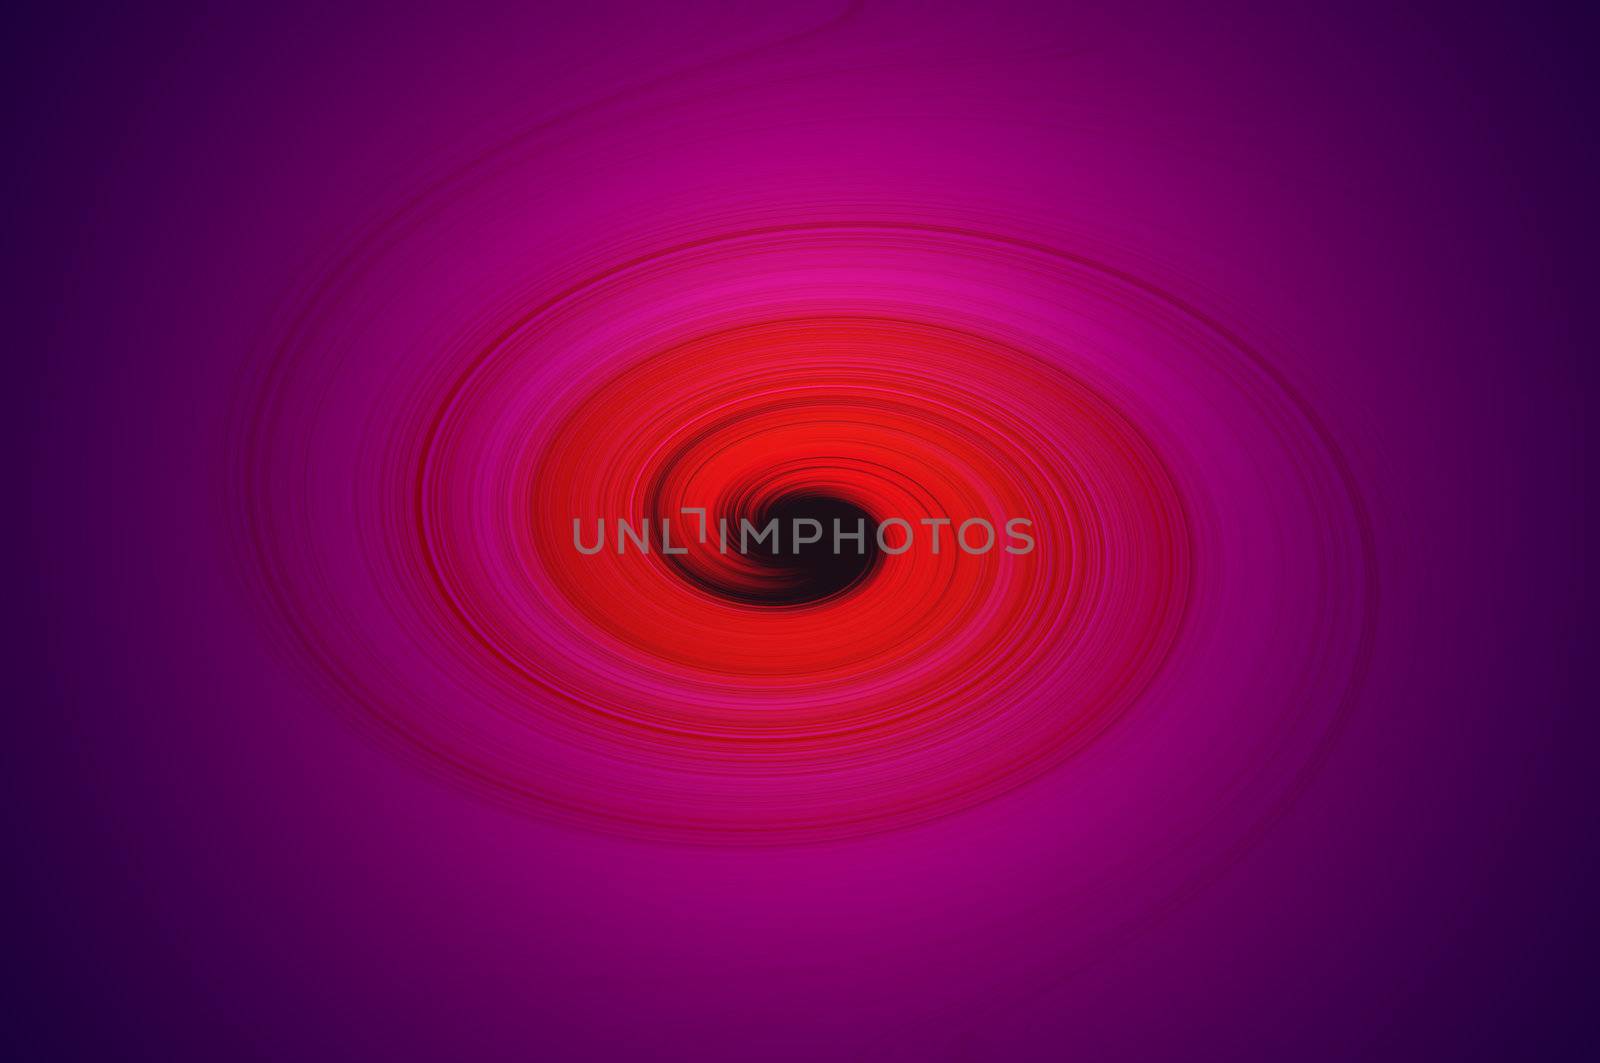 Bright red abstract light effect swirling towards a dark centre against a pink and mauve background